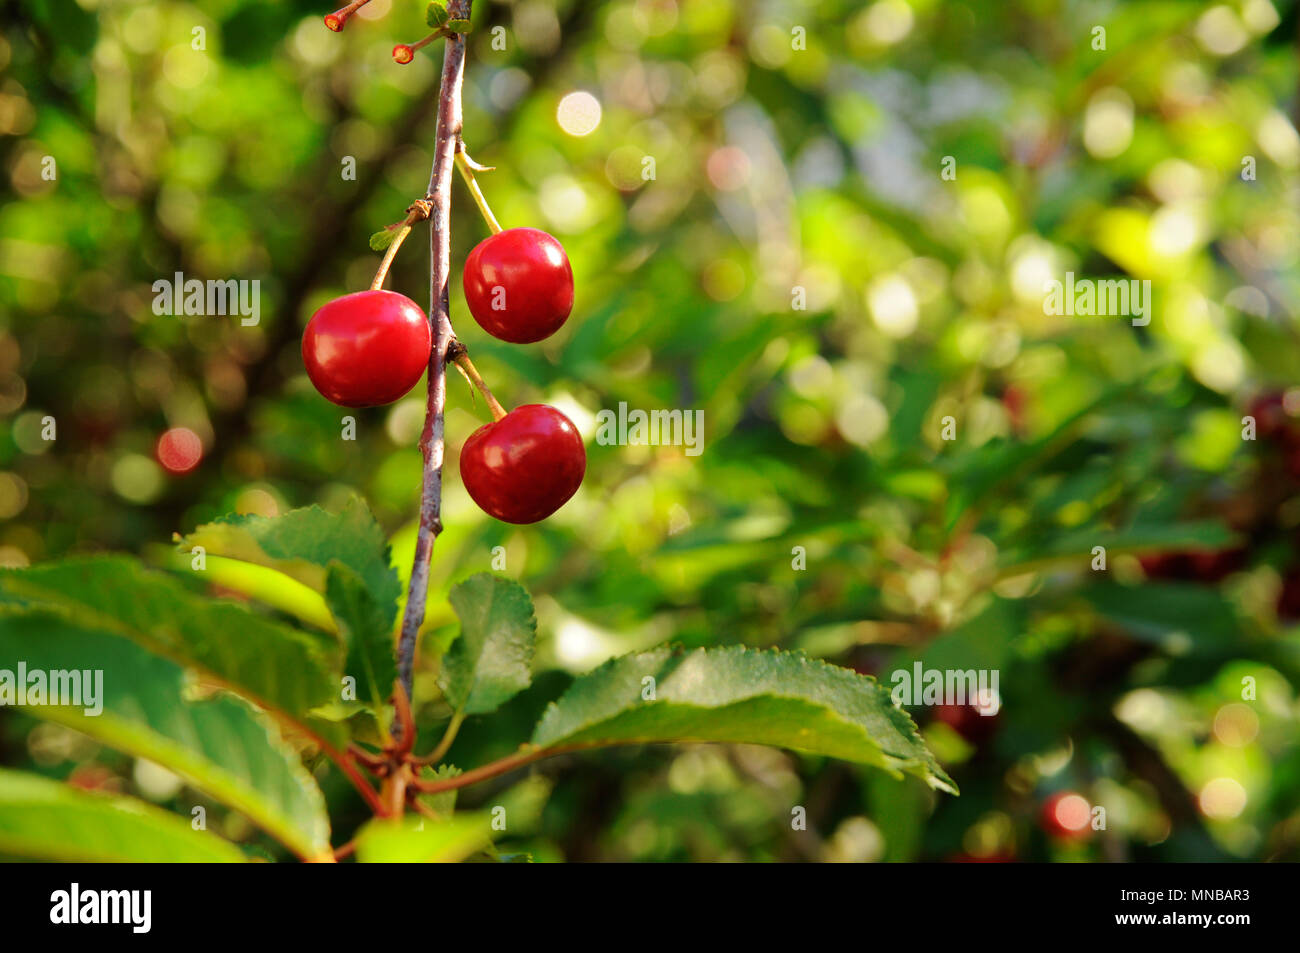 Ripe red sour cherries on a branch Stock Photo